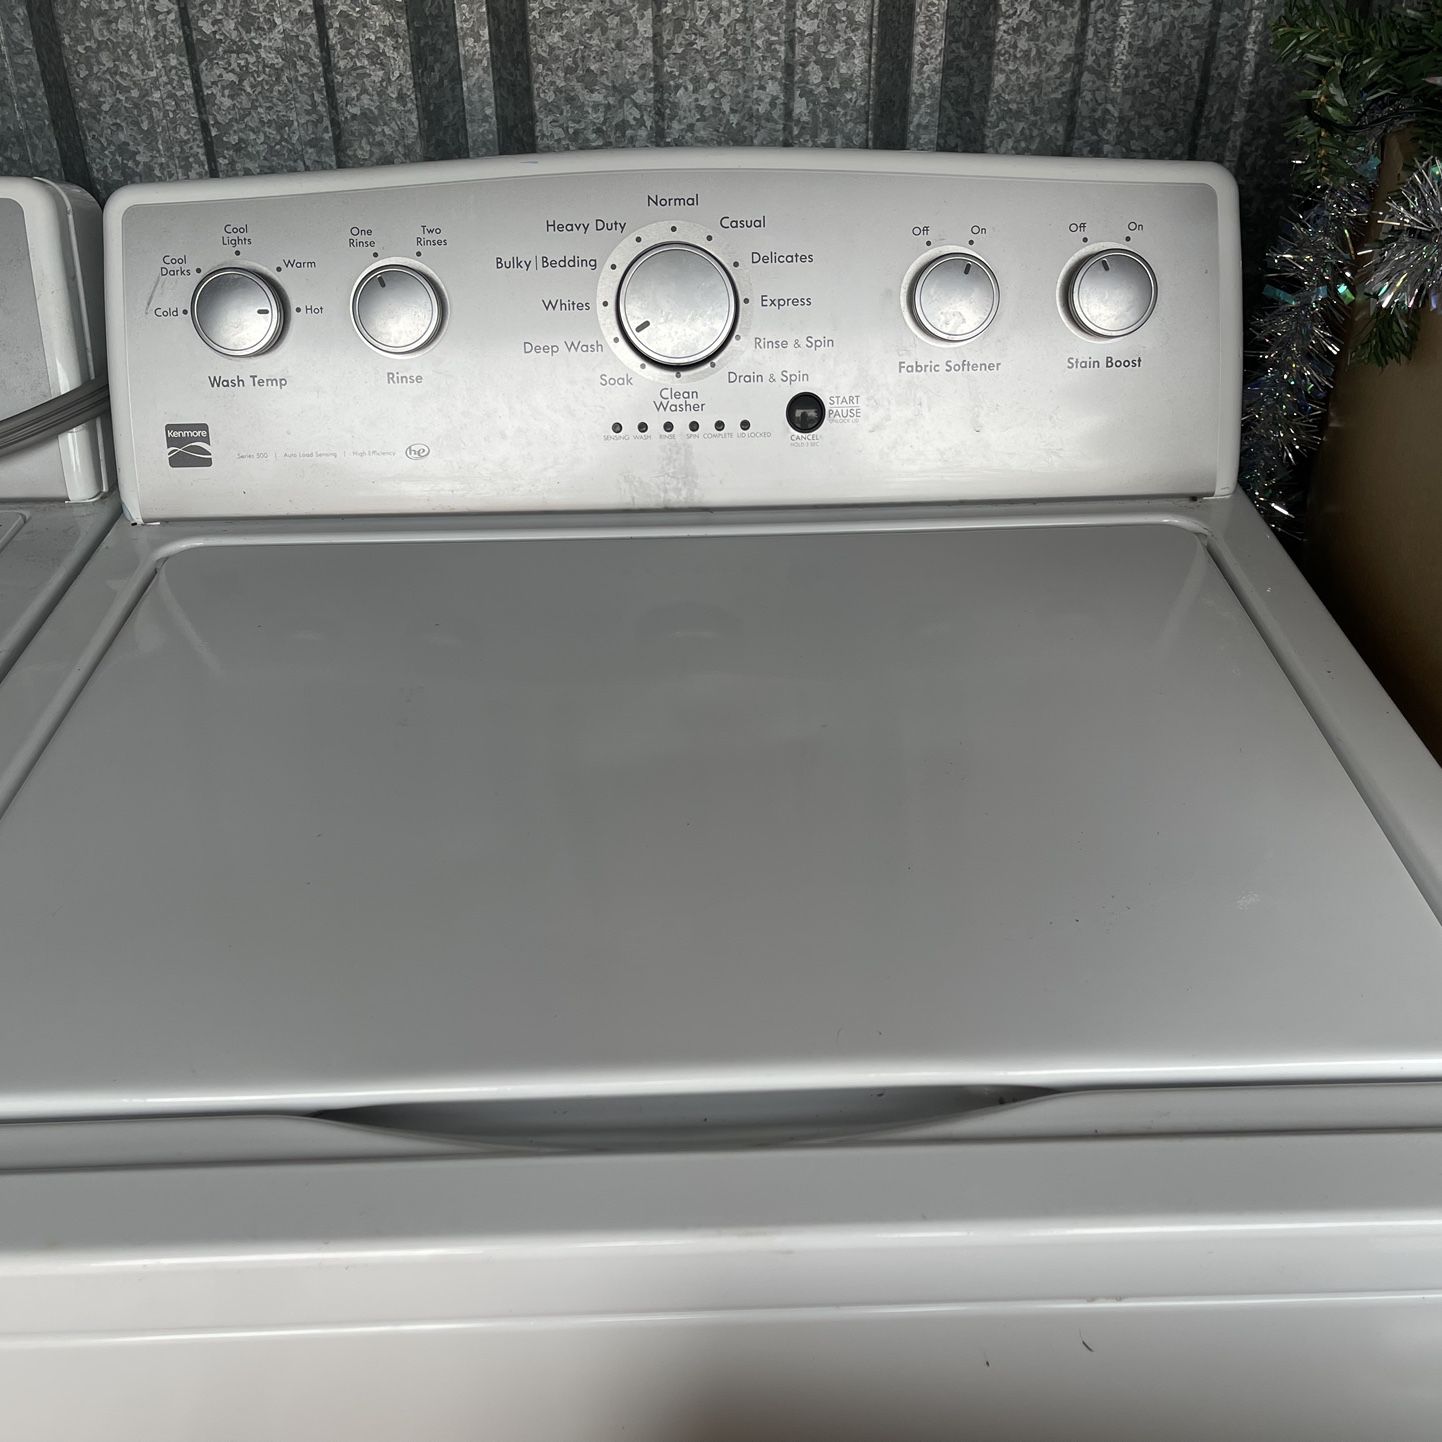 I have a Kenmore Series 500:  Washer- Auto Load Sensing and High Efficiency